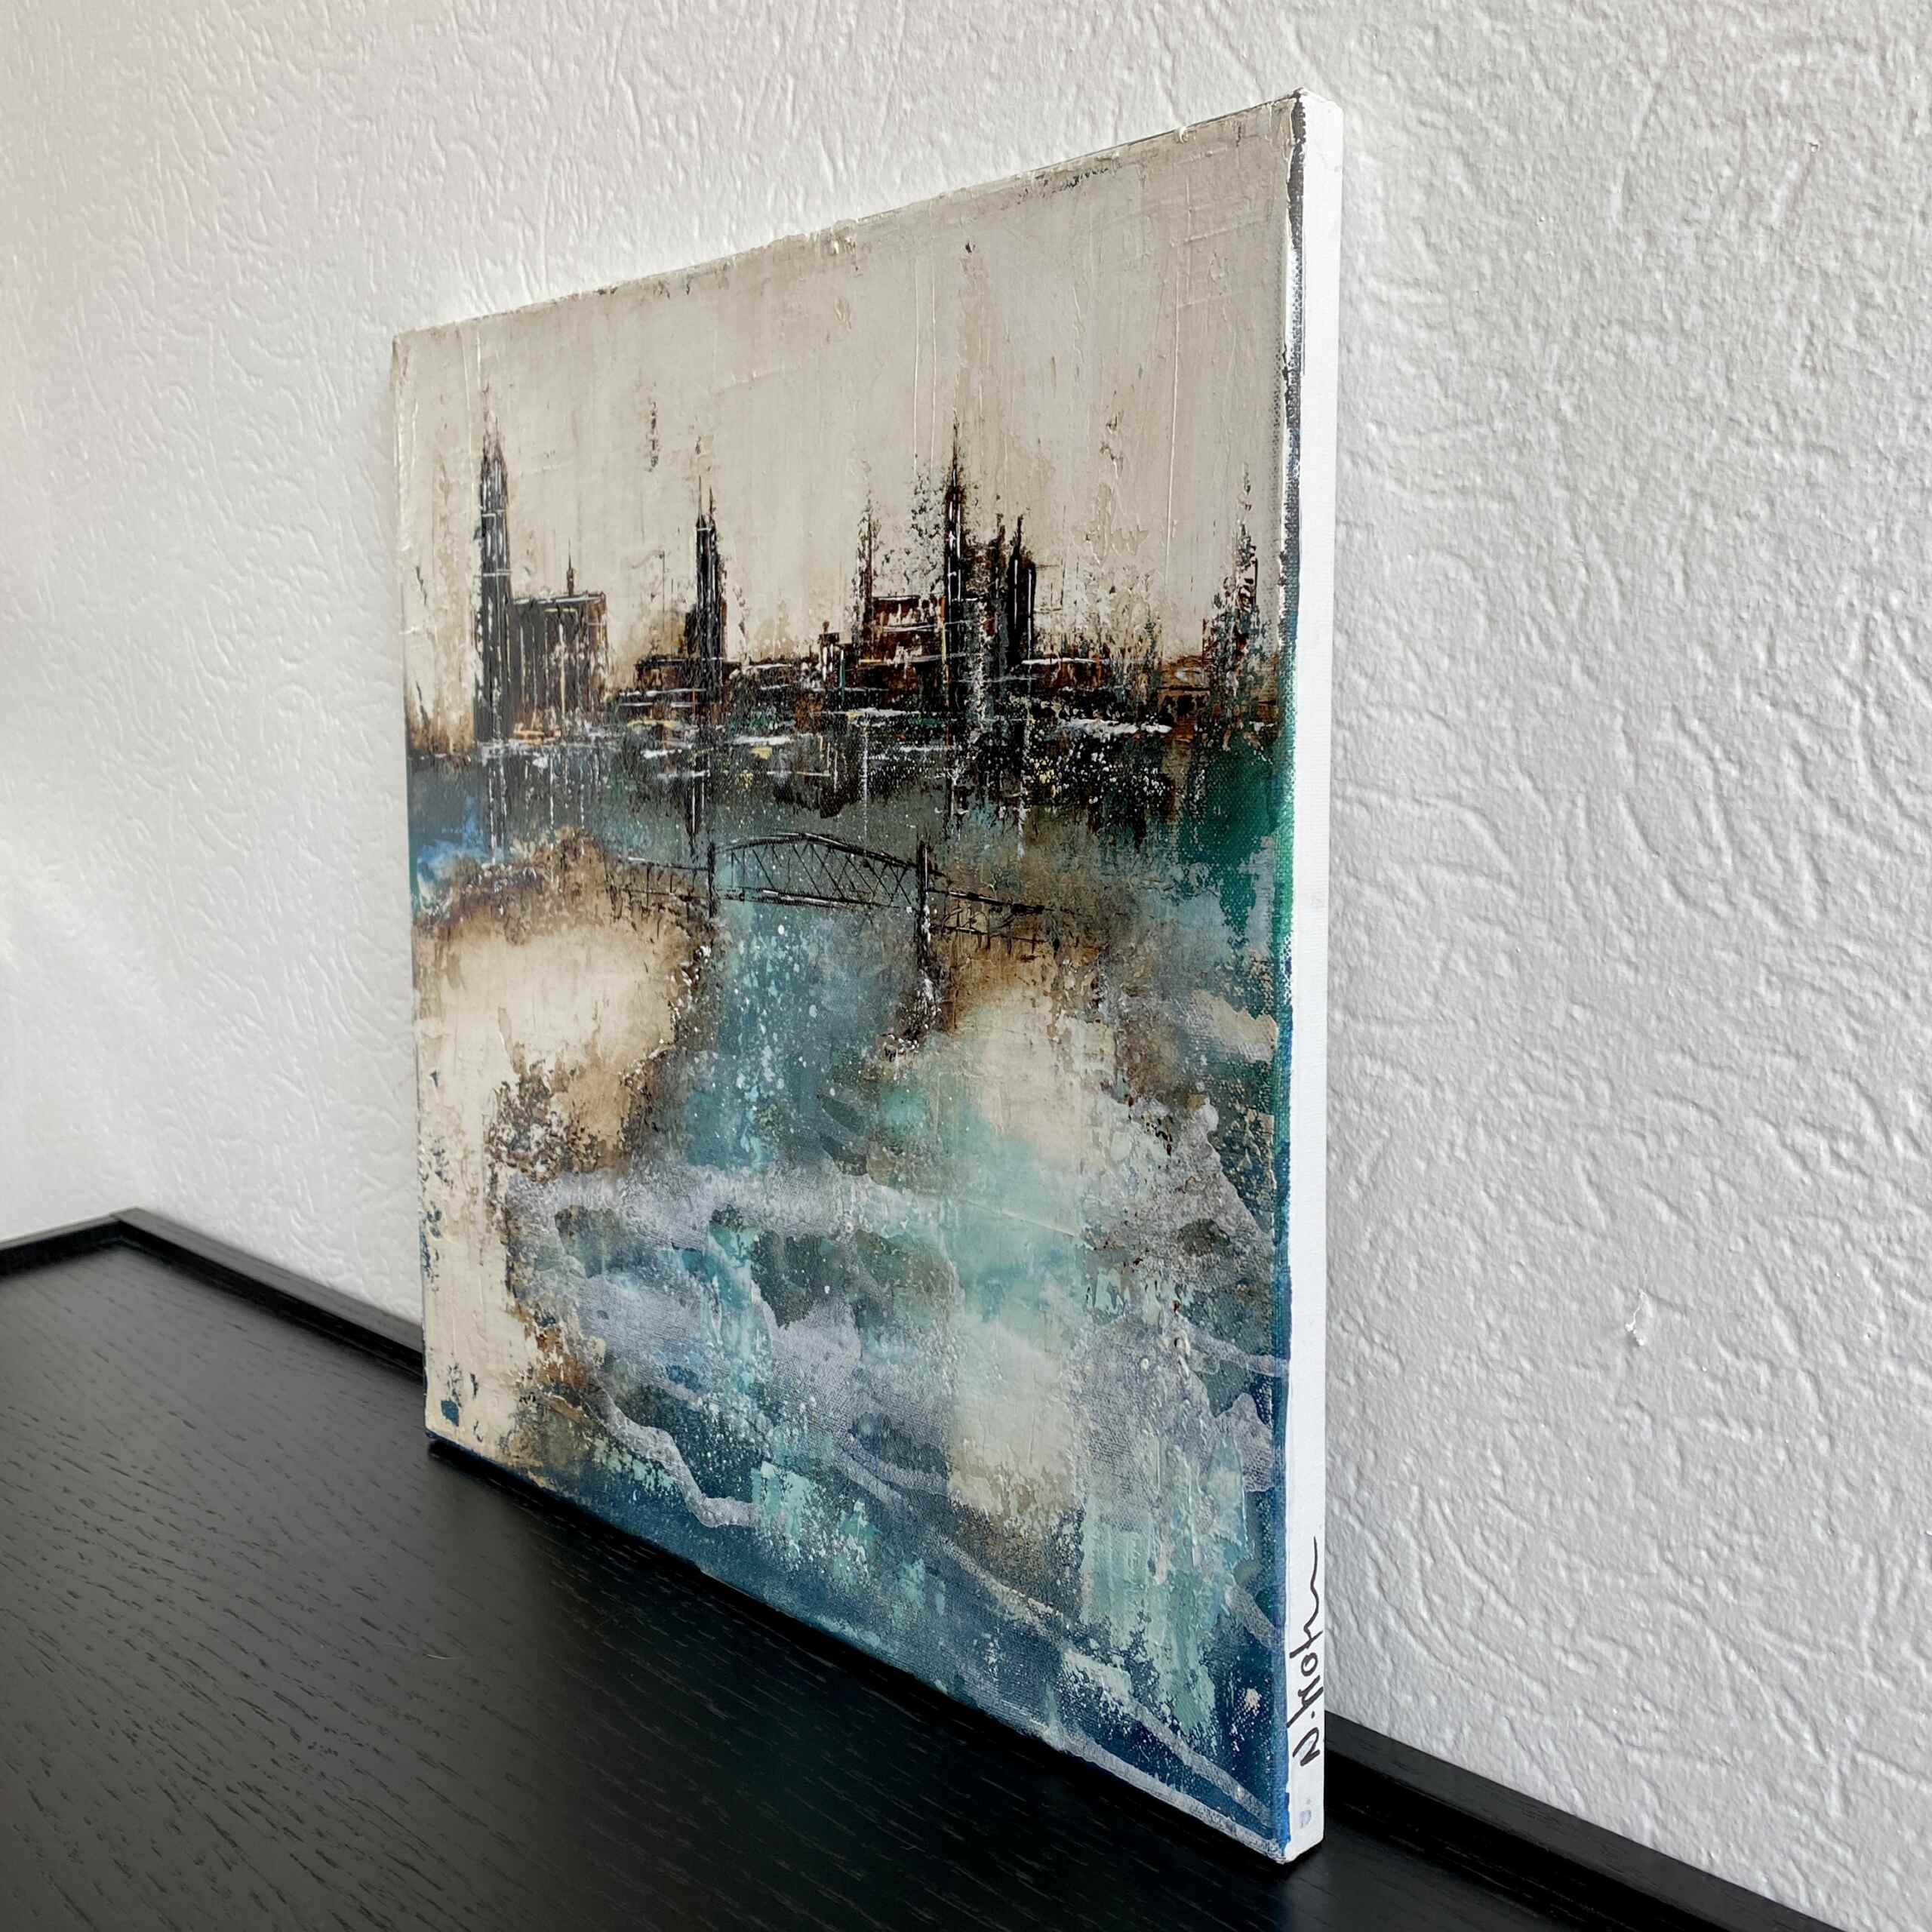 Side view of artwork "Elbe Impressions No 3" by Nina Groth